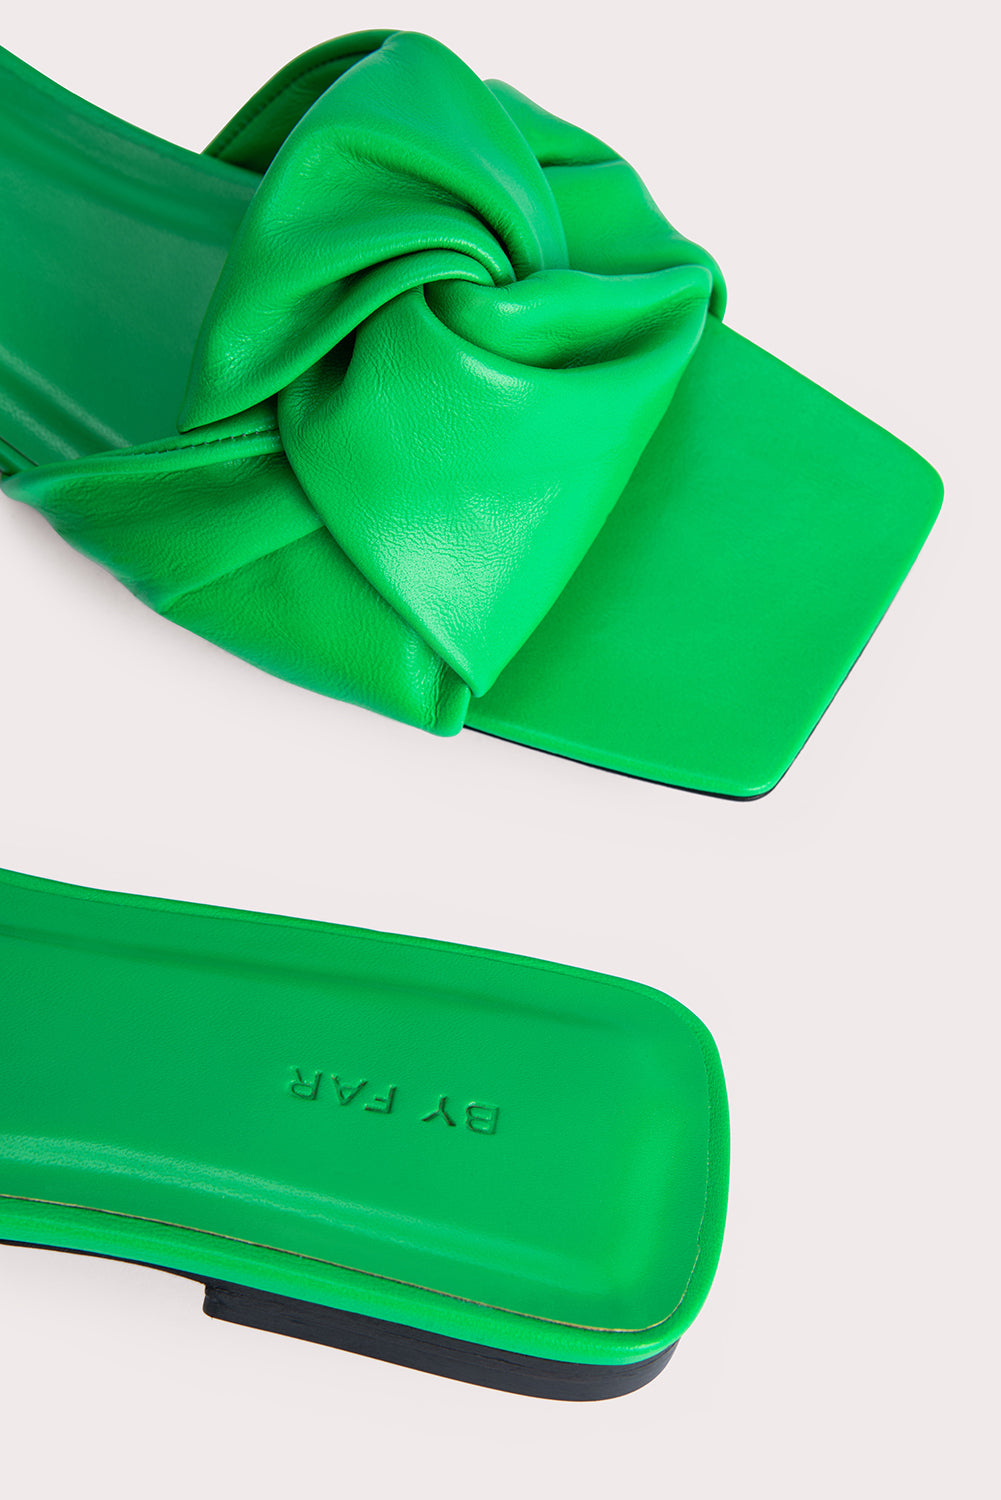 Lima Super Green Gloss Leather